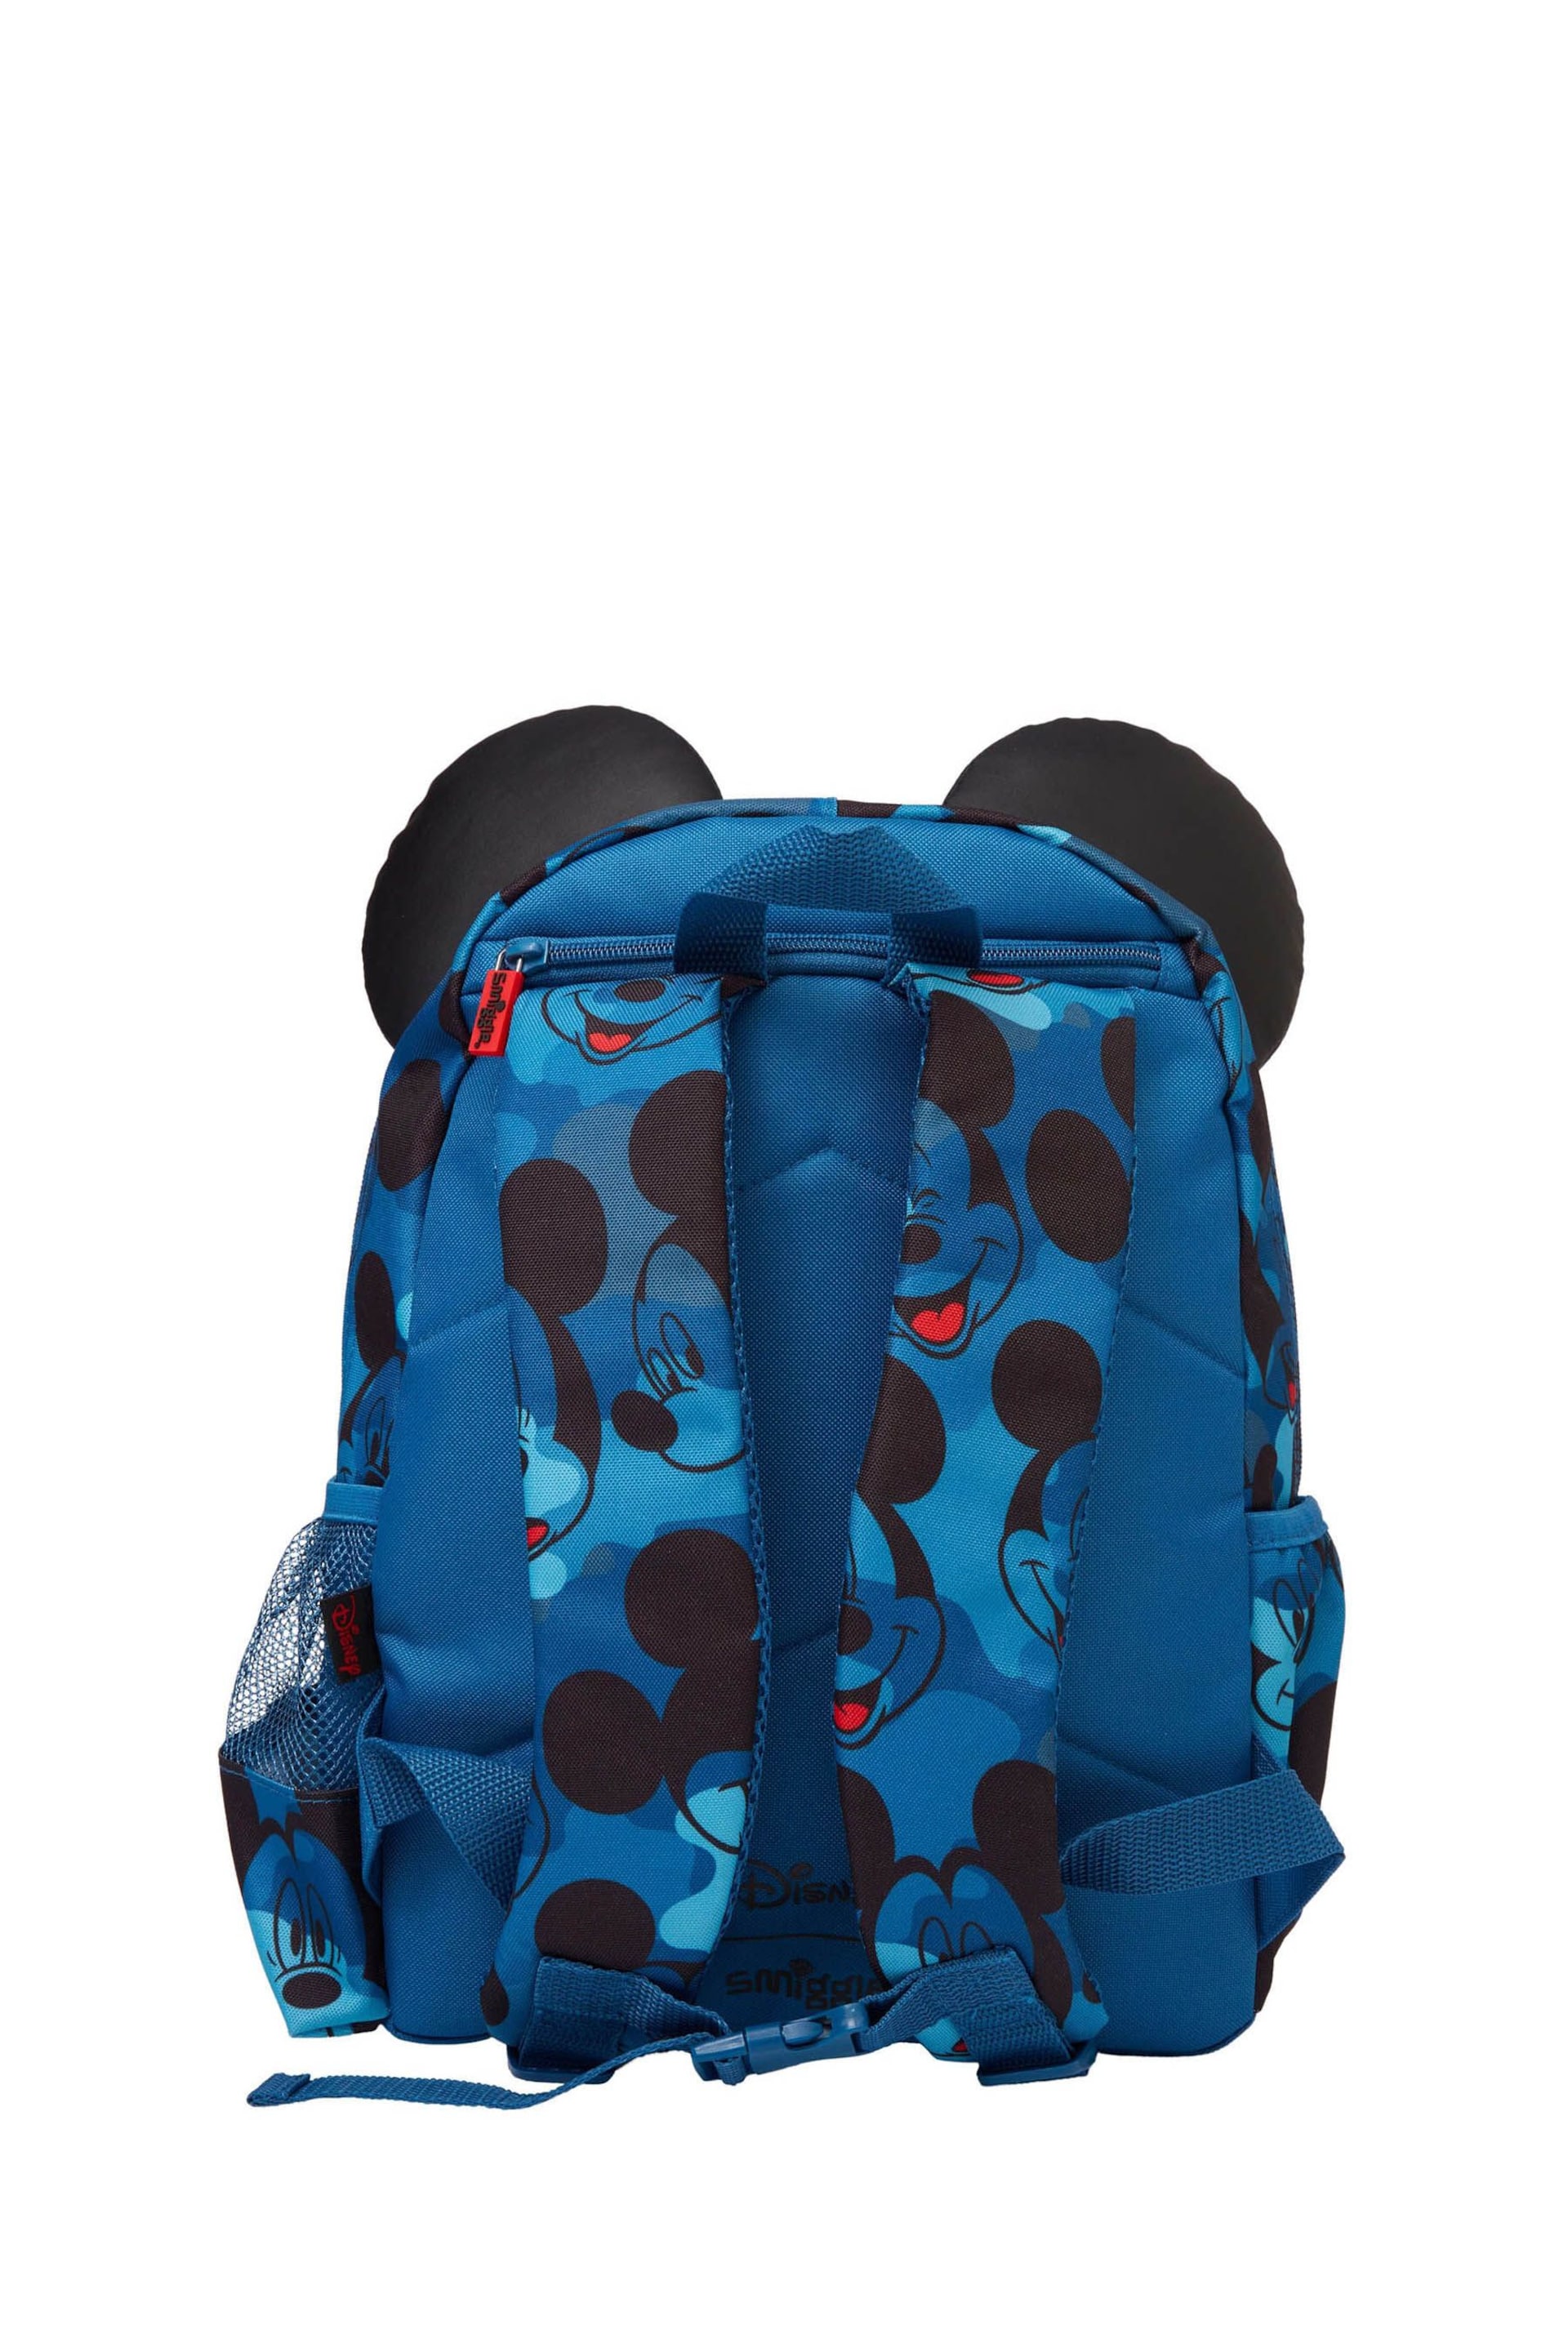 Smiggle Blue Mickey Mouse Junior Mickey Mouse Disney Character Hoodie Backpack - Image 2 of 3